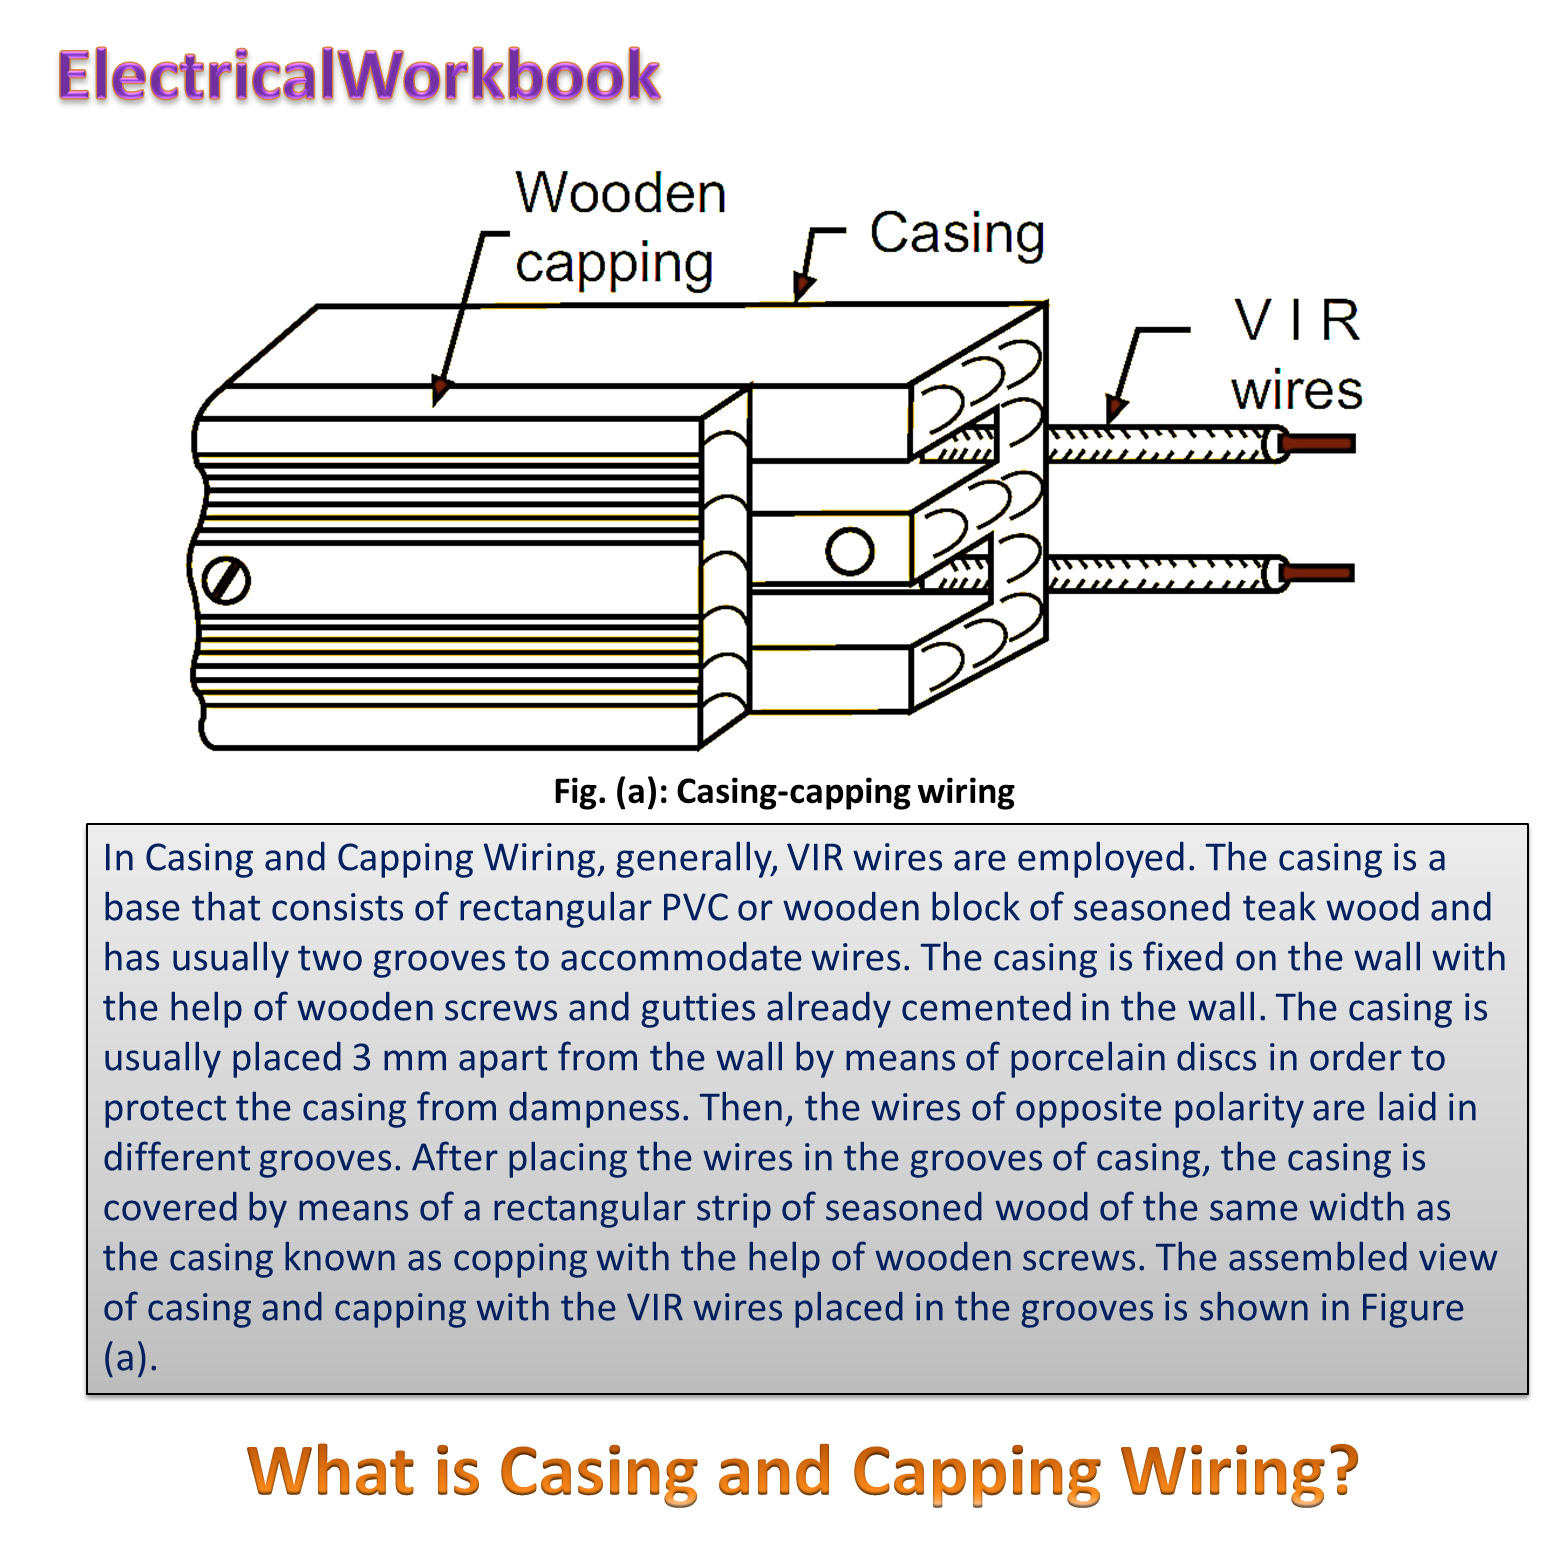 What is Casing and Capping Wiring